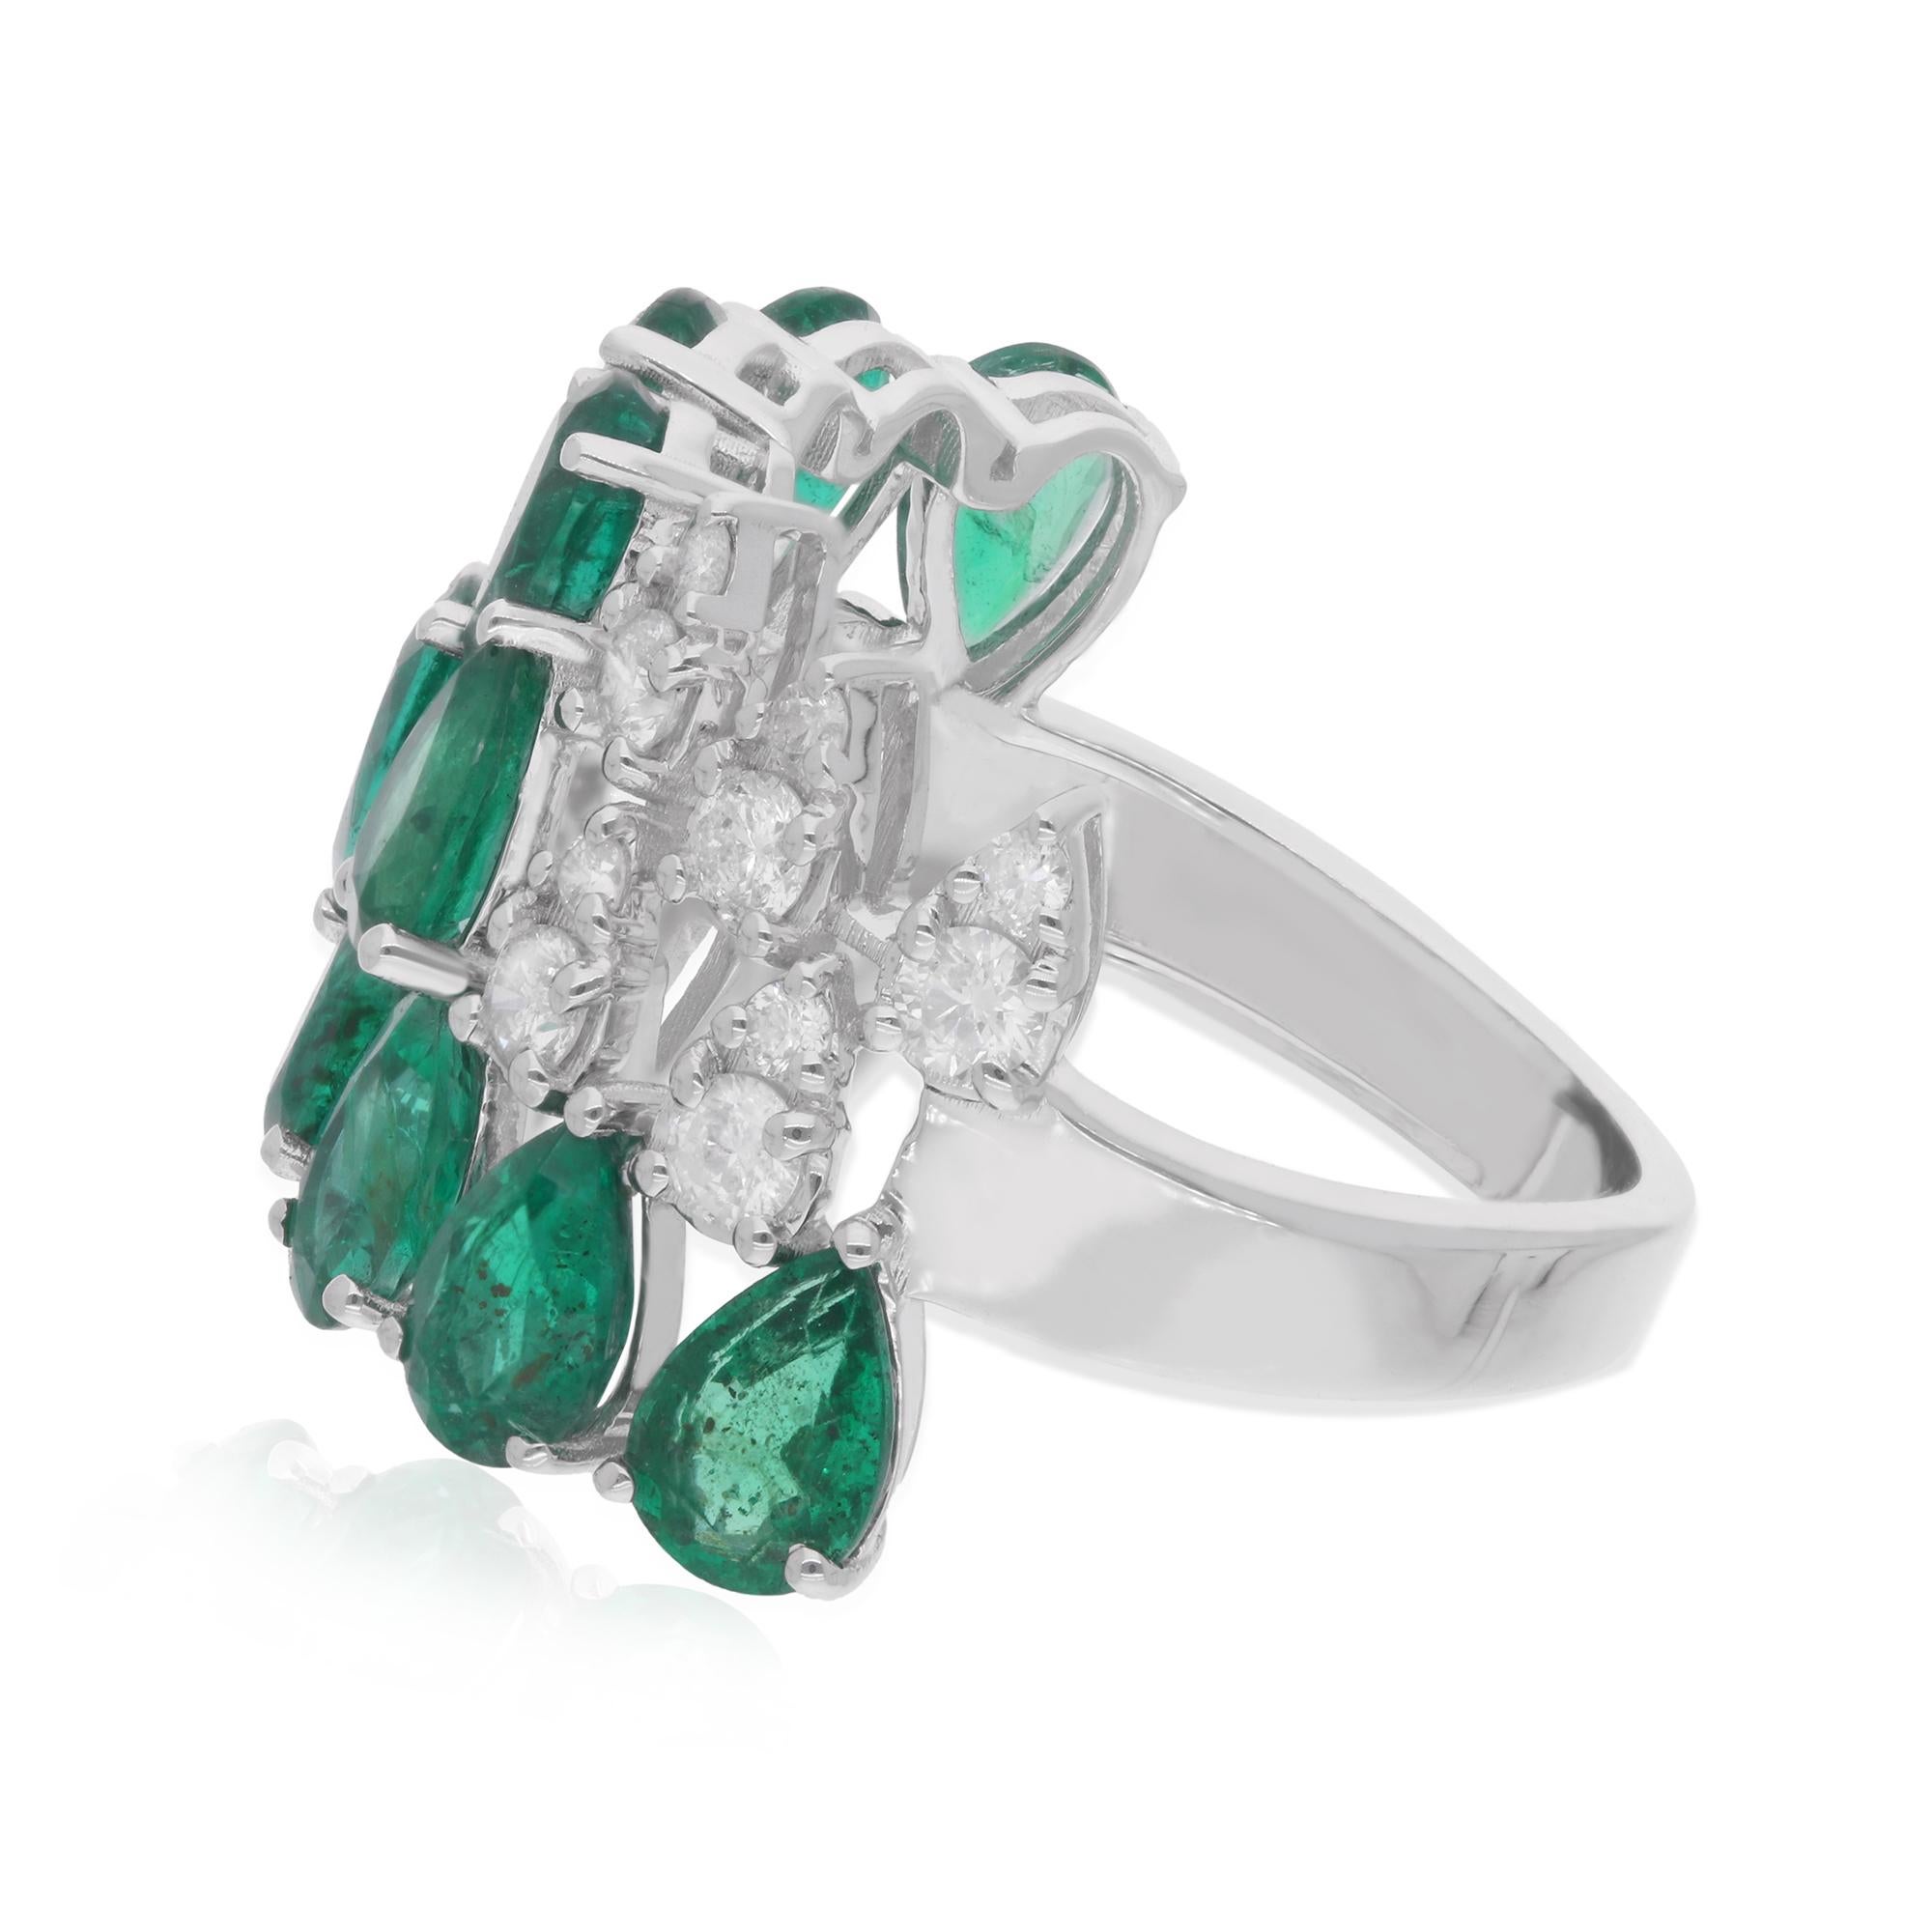 Step into a world of enchantment with this mesmerizing handmade jewelry masterpiece – a pear-shaped Zambian emerald gemstone ring accented with diamonds, set in 18 karat white gold. Imbued with the essence of luxury and sophistication, this